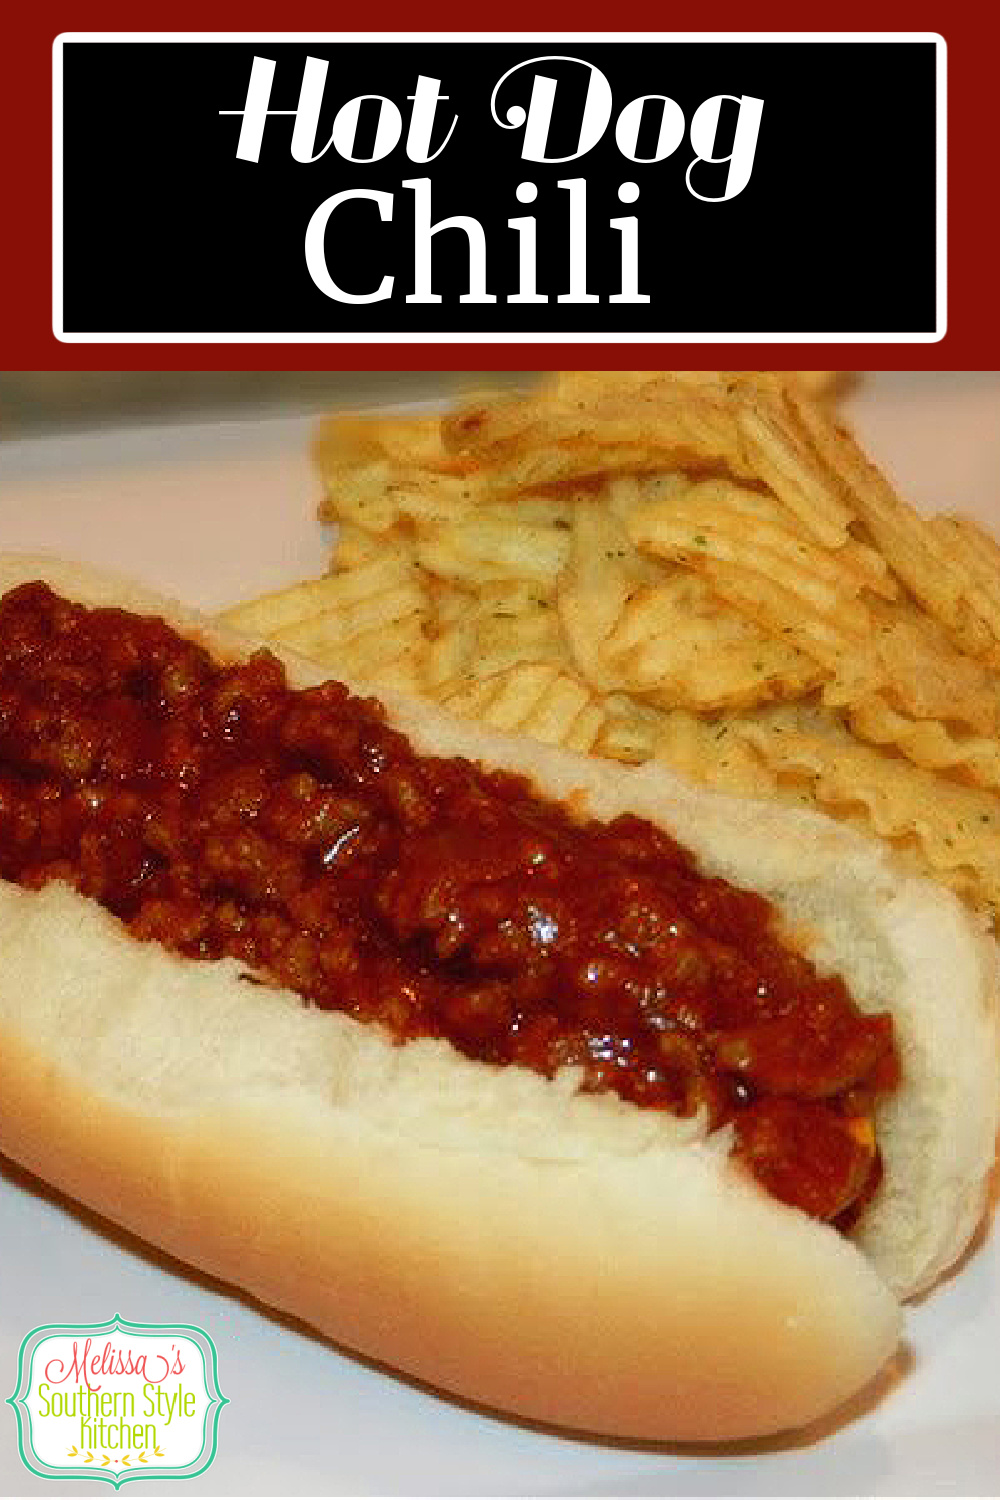 Homestyle Hot Dog Chili for cookouts and tailgating is the perfect topping for your hot dogs and grilled sausages #chili #hotdogchili #chilisauce #grilled #hotdogs #homestylechili #dinner #dinnerideas #food #recipes #southernfood #southernrecipes